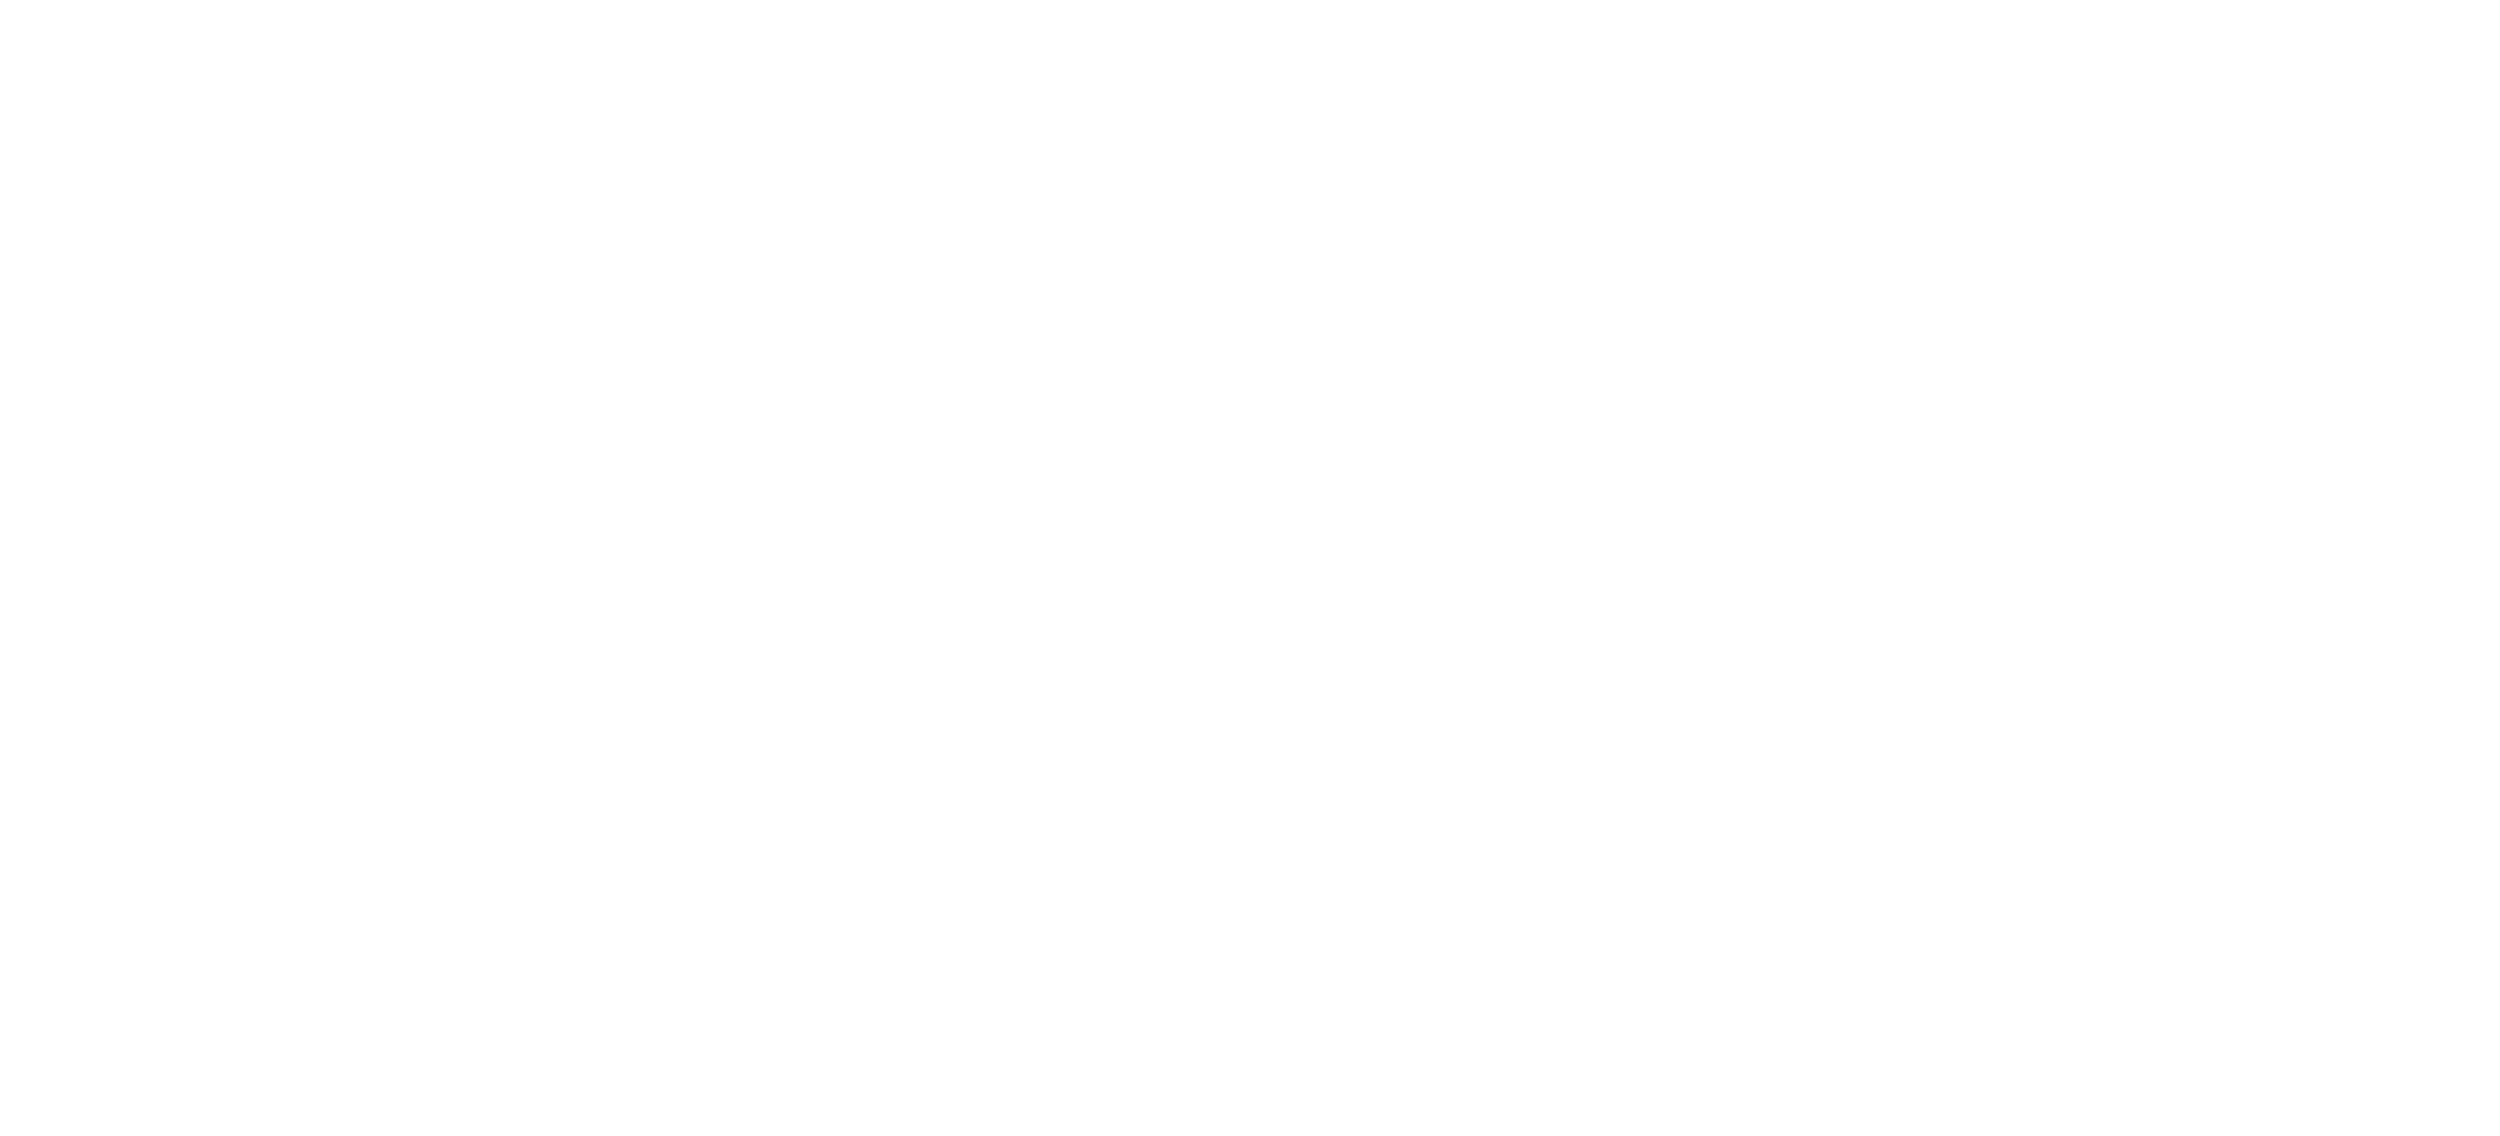 Democratic Party of NM logo.png